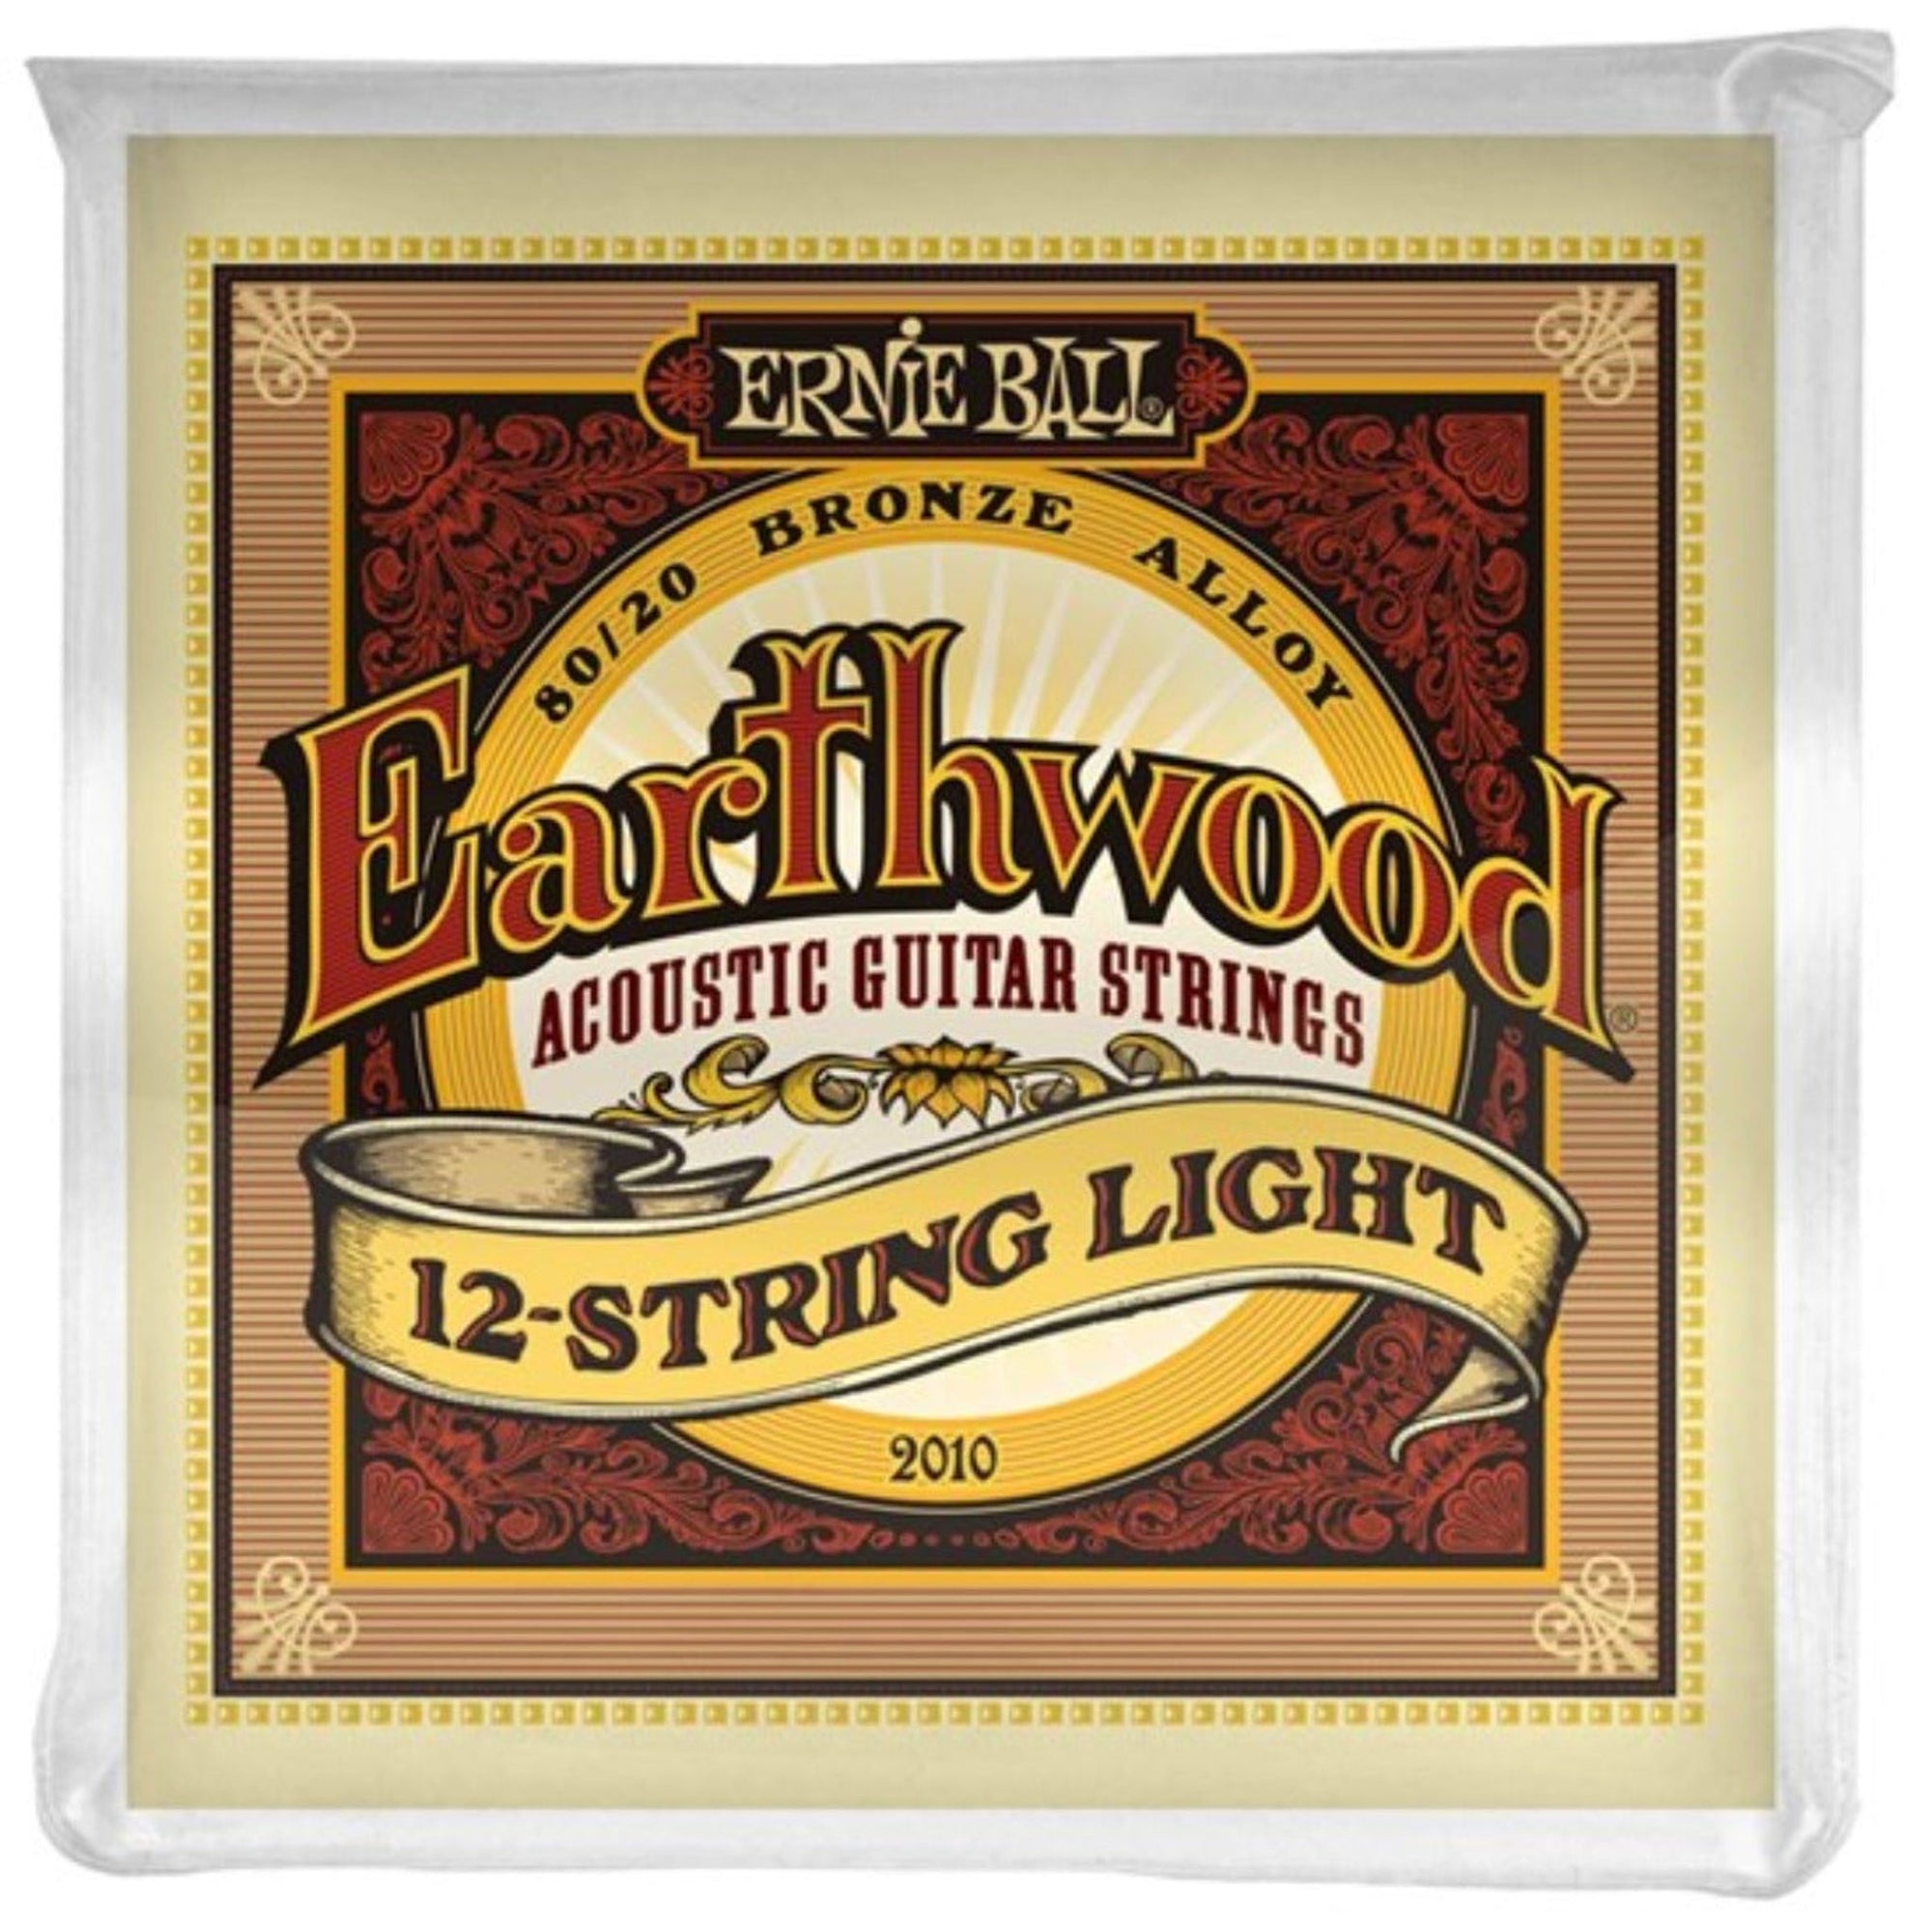 The Ernie Ball Acoustic Guitar Strings are made from 80% copper, 20% zinc wire wrapped around hex shaped tin plated steel core wire. The most popular acoustic guitar strings provide a crisp, ringing sound with pleasing overtones. 